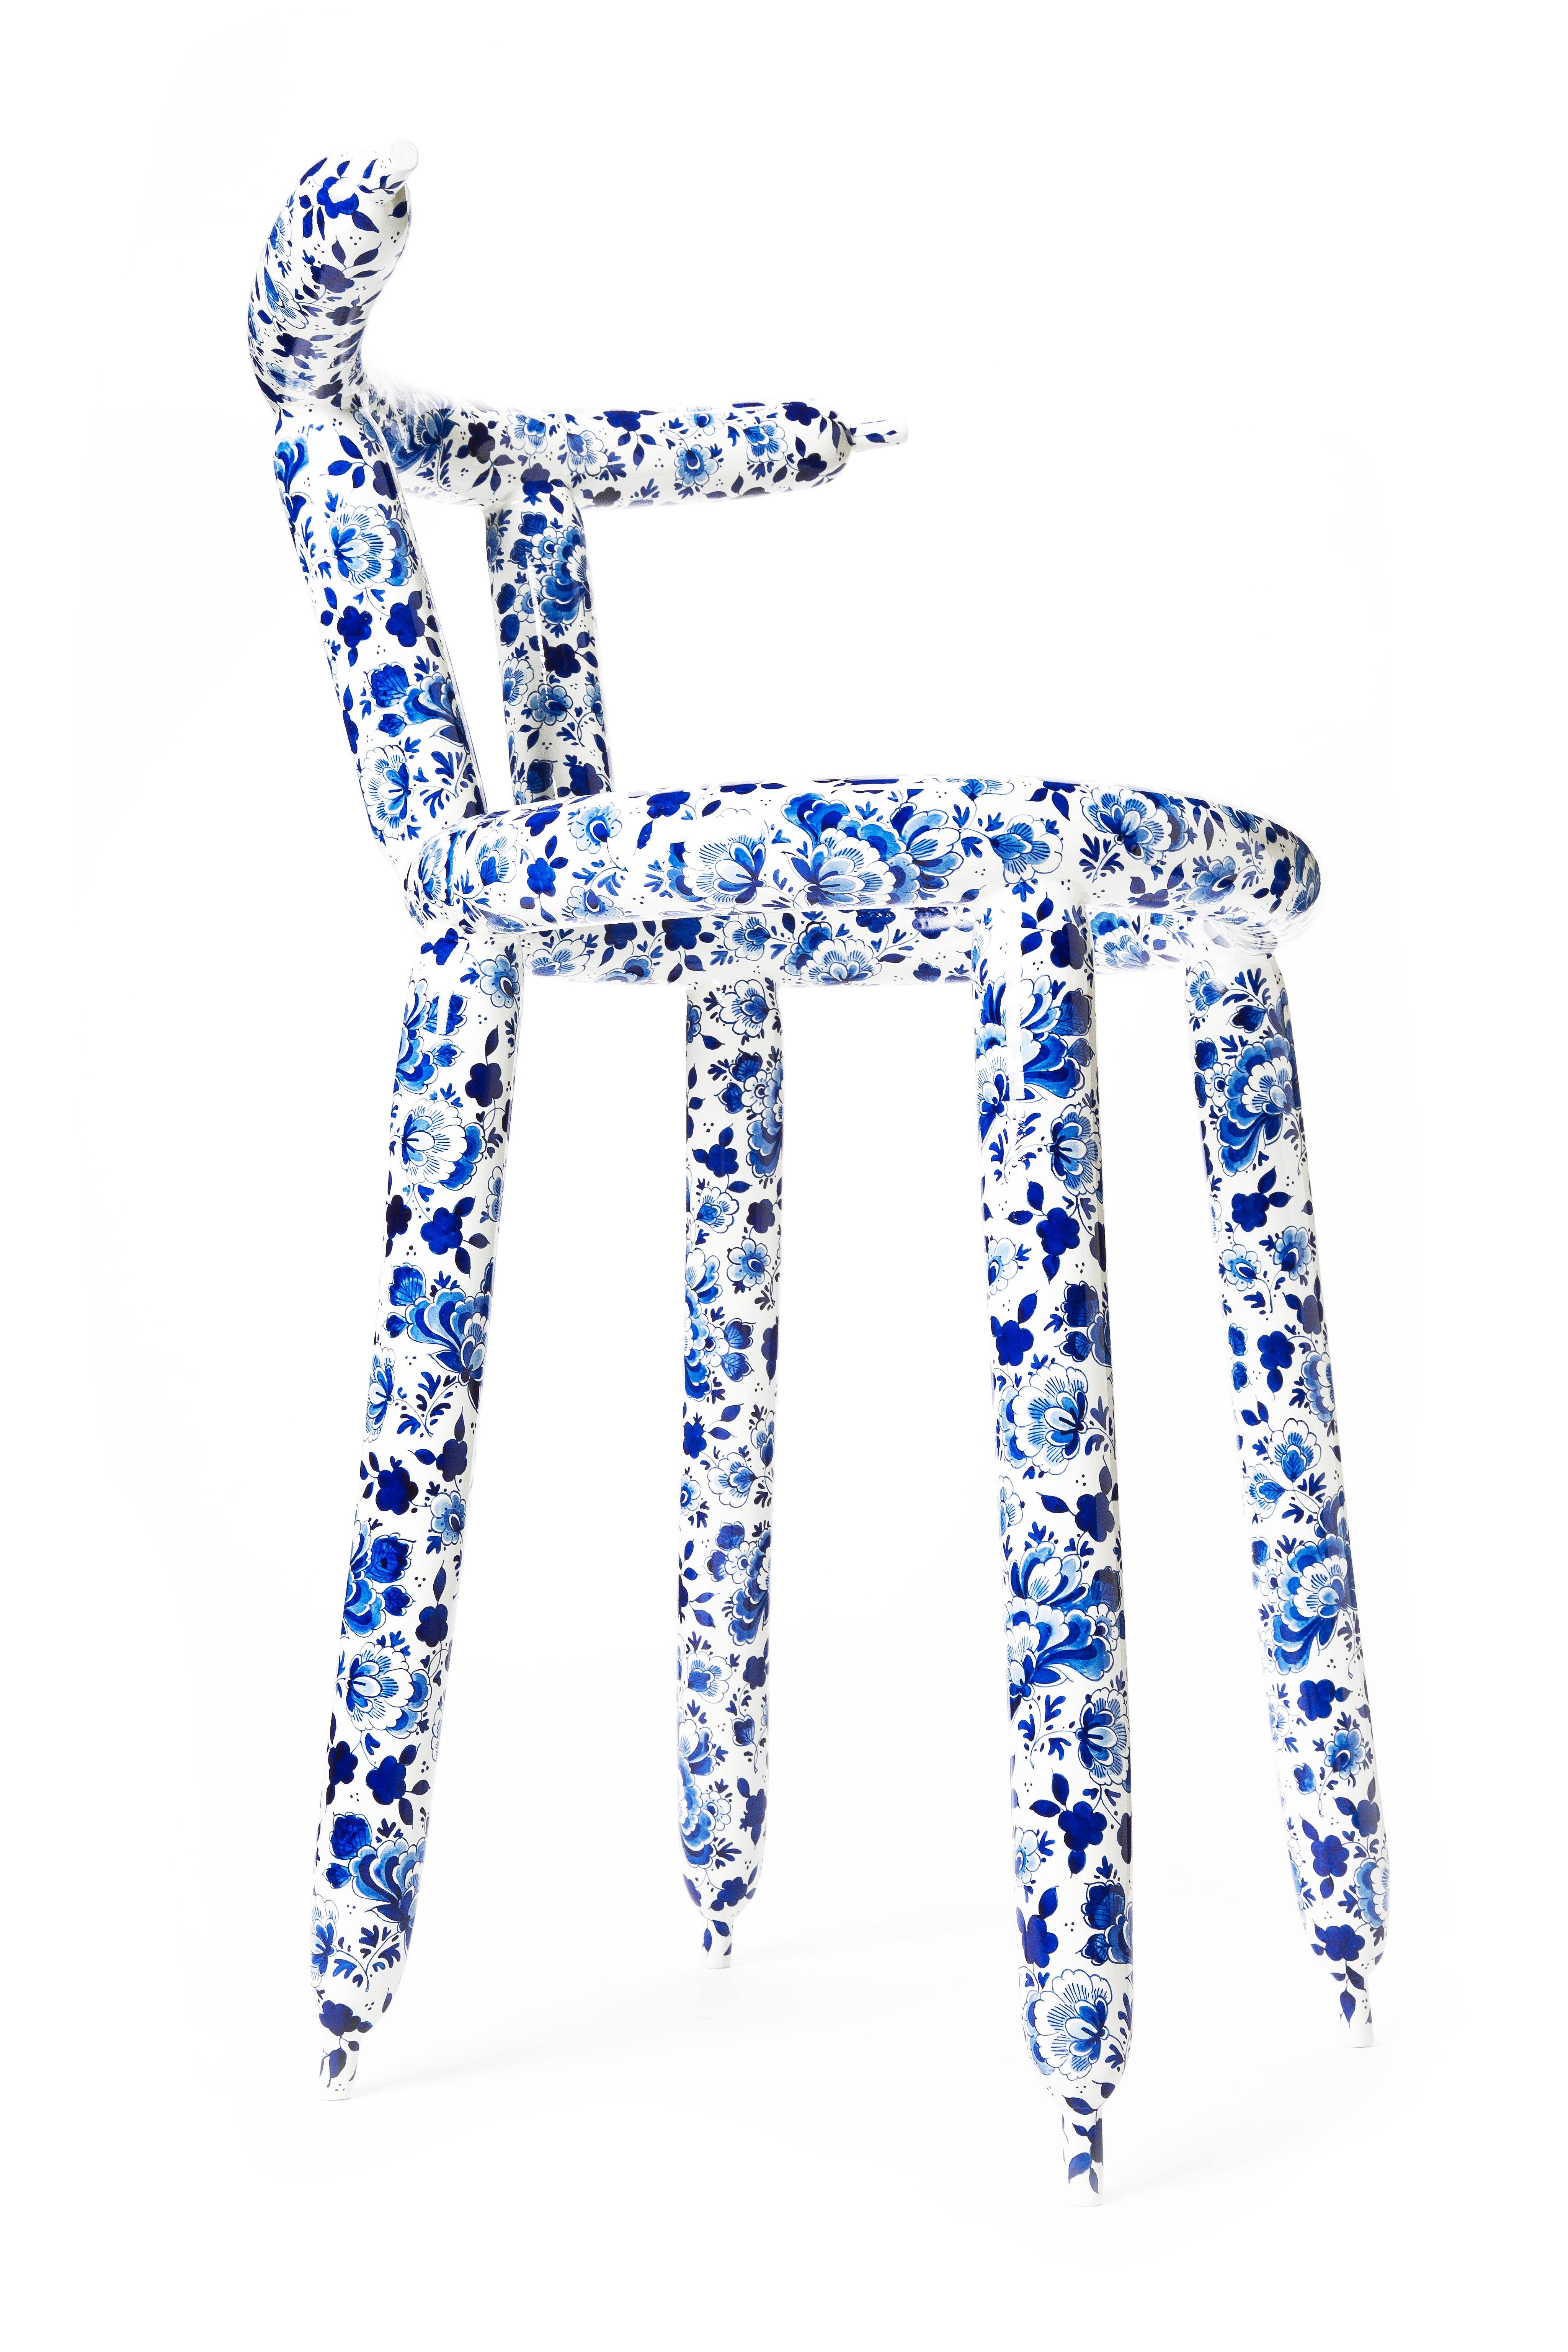 Brushed Carbon Balloon Chair Delft Blue, by Marcel Wanders, 2013, Unique For Sale